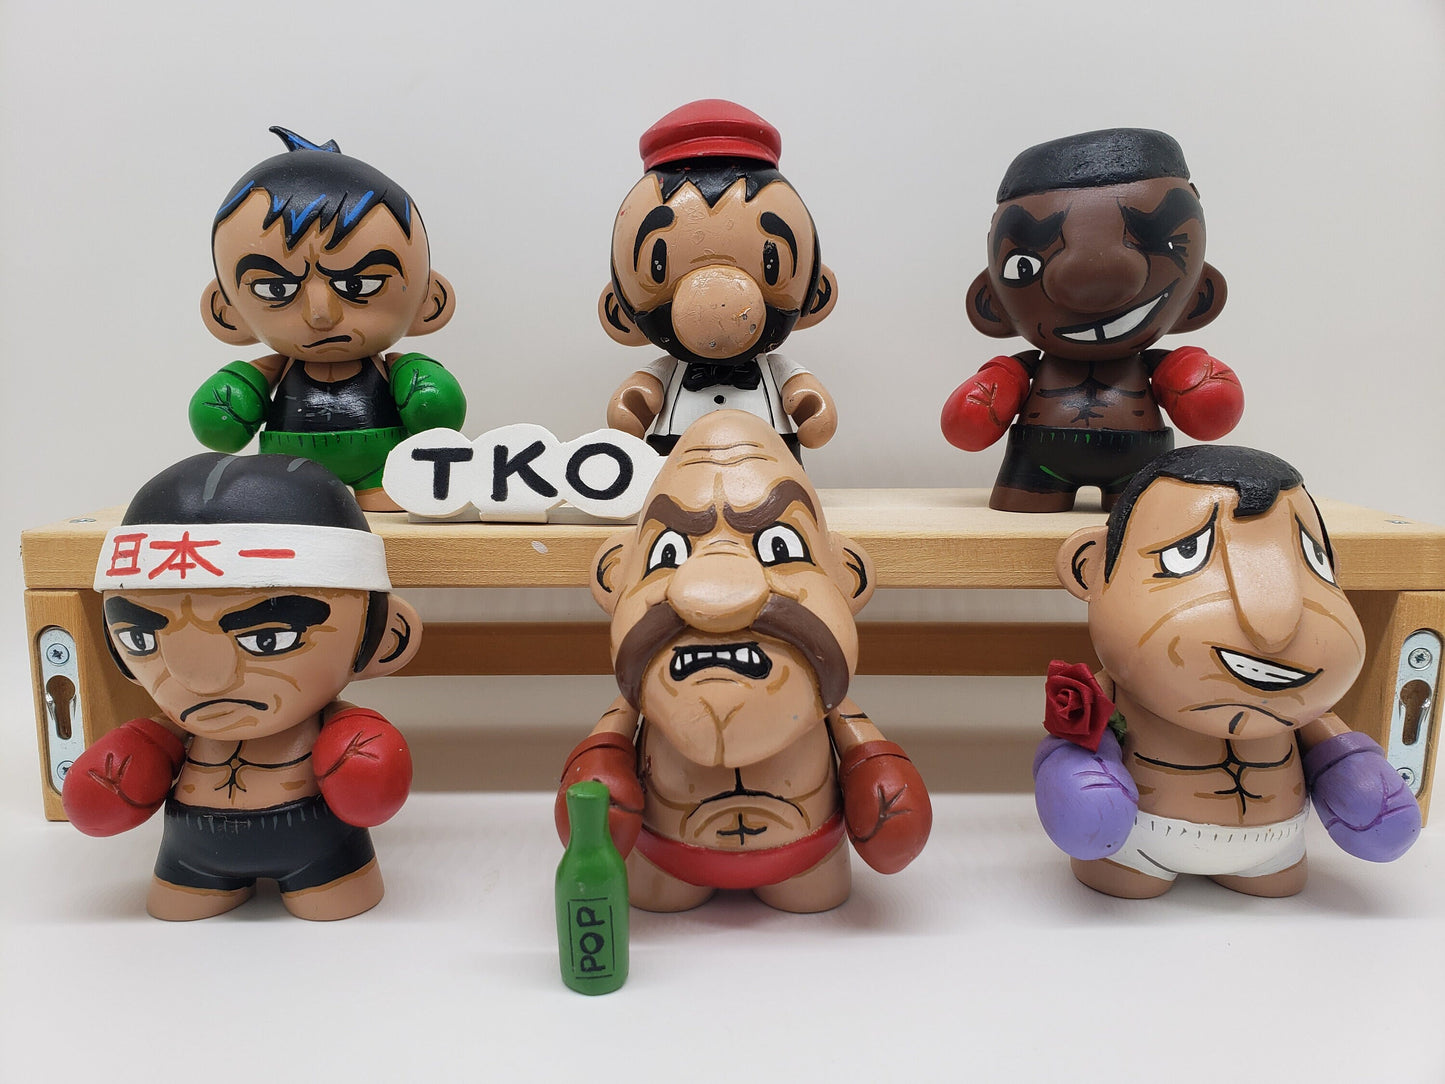 Mike Tyson's Punch-Out!! Rare Collectible Designer Art Vinyl Toy Figure Custom Kidrobot Perfect Birthday Gift